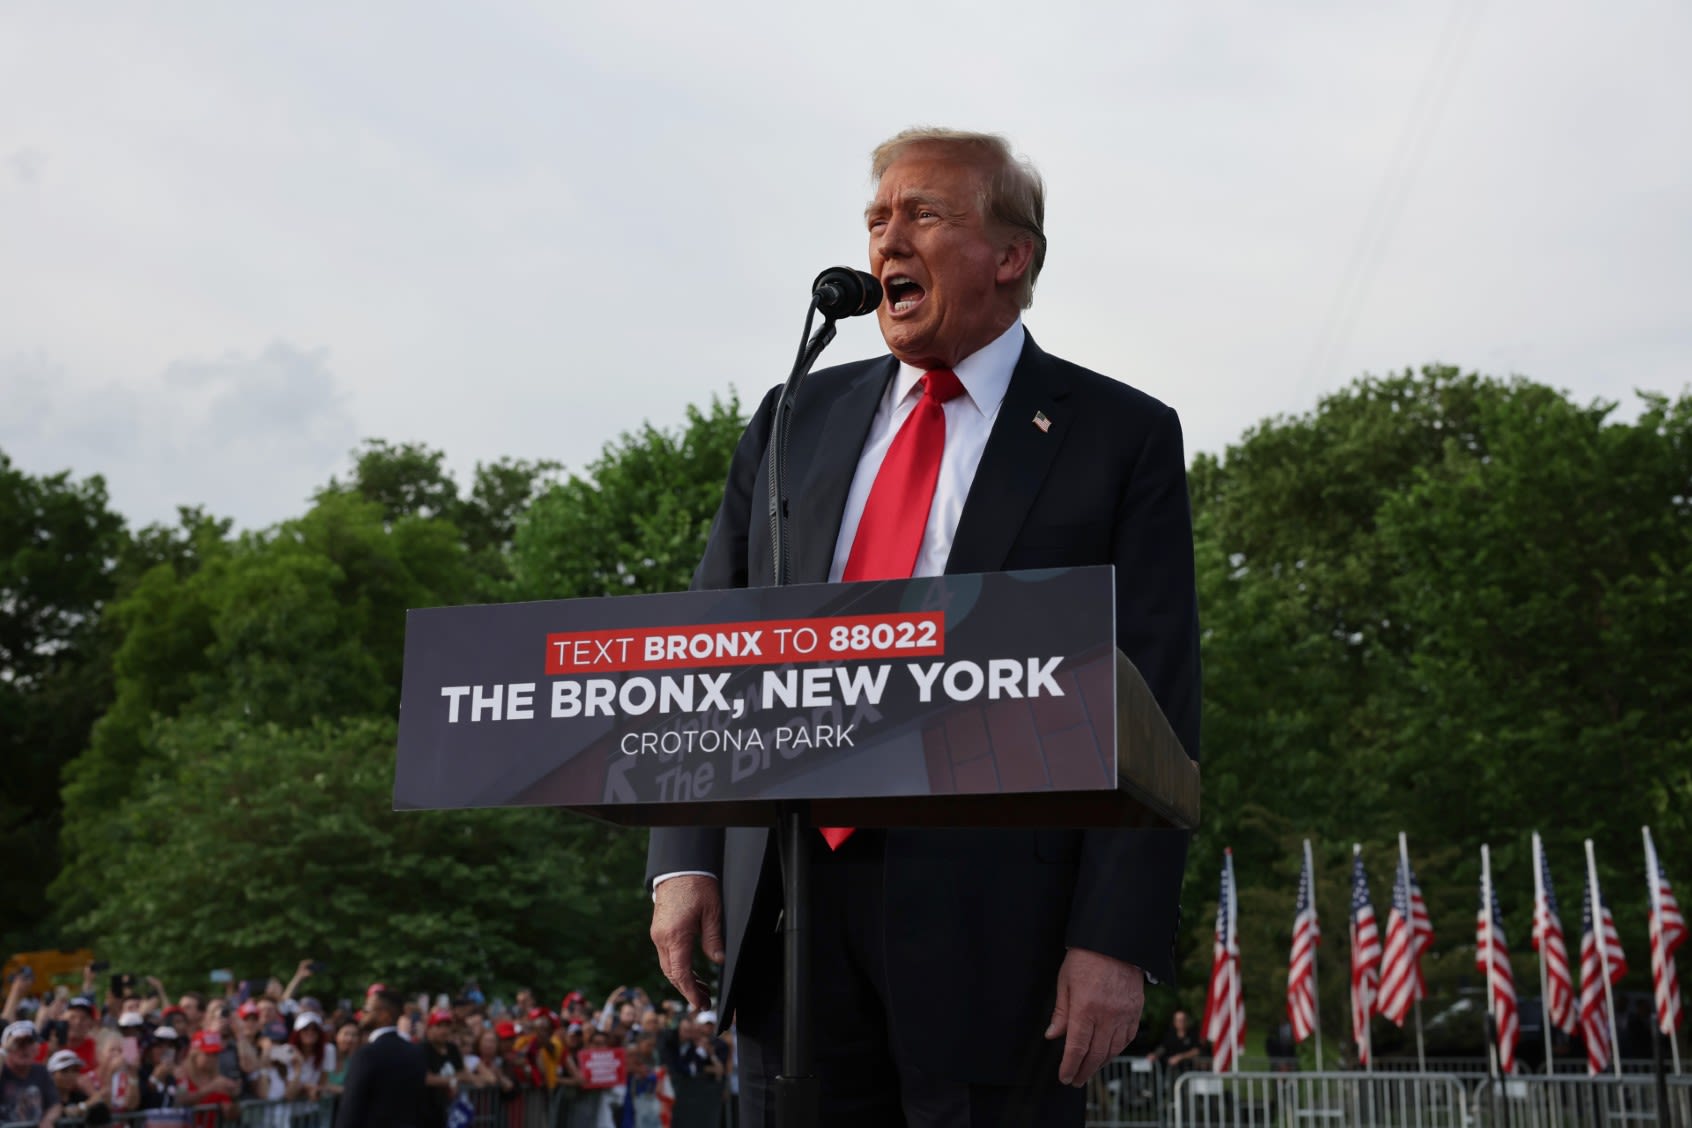 “I think they’re building an army": Trump spews anti-immigrant sentiments at rally in the Bronx